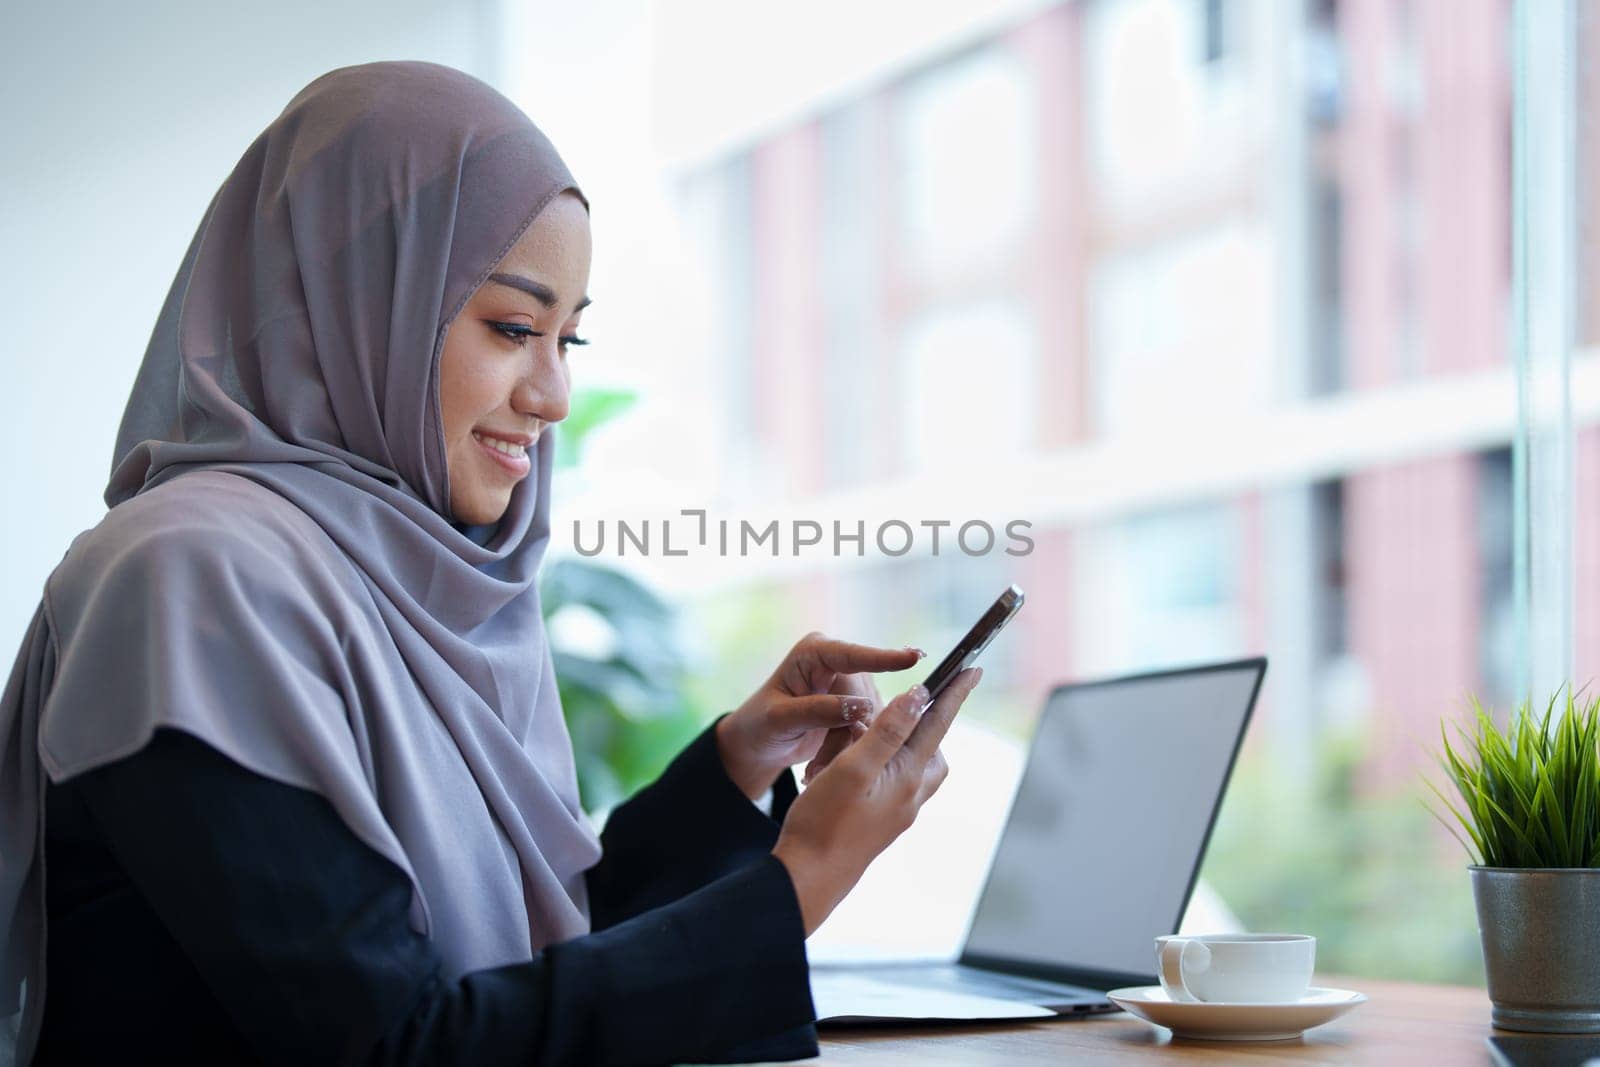 Beautiful Muslim woman talking on the phone and using a computer on her desk.